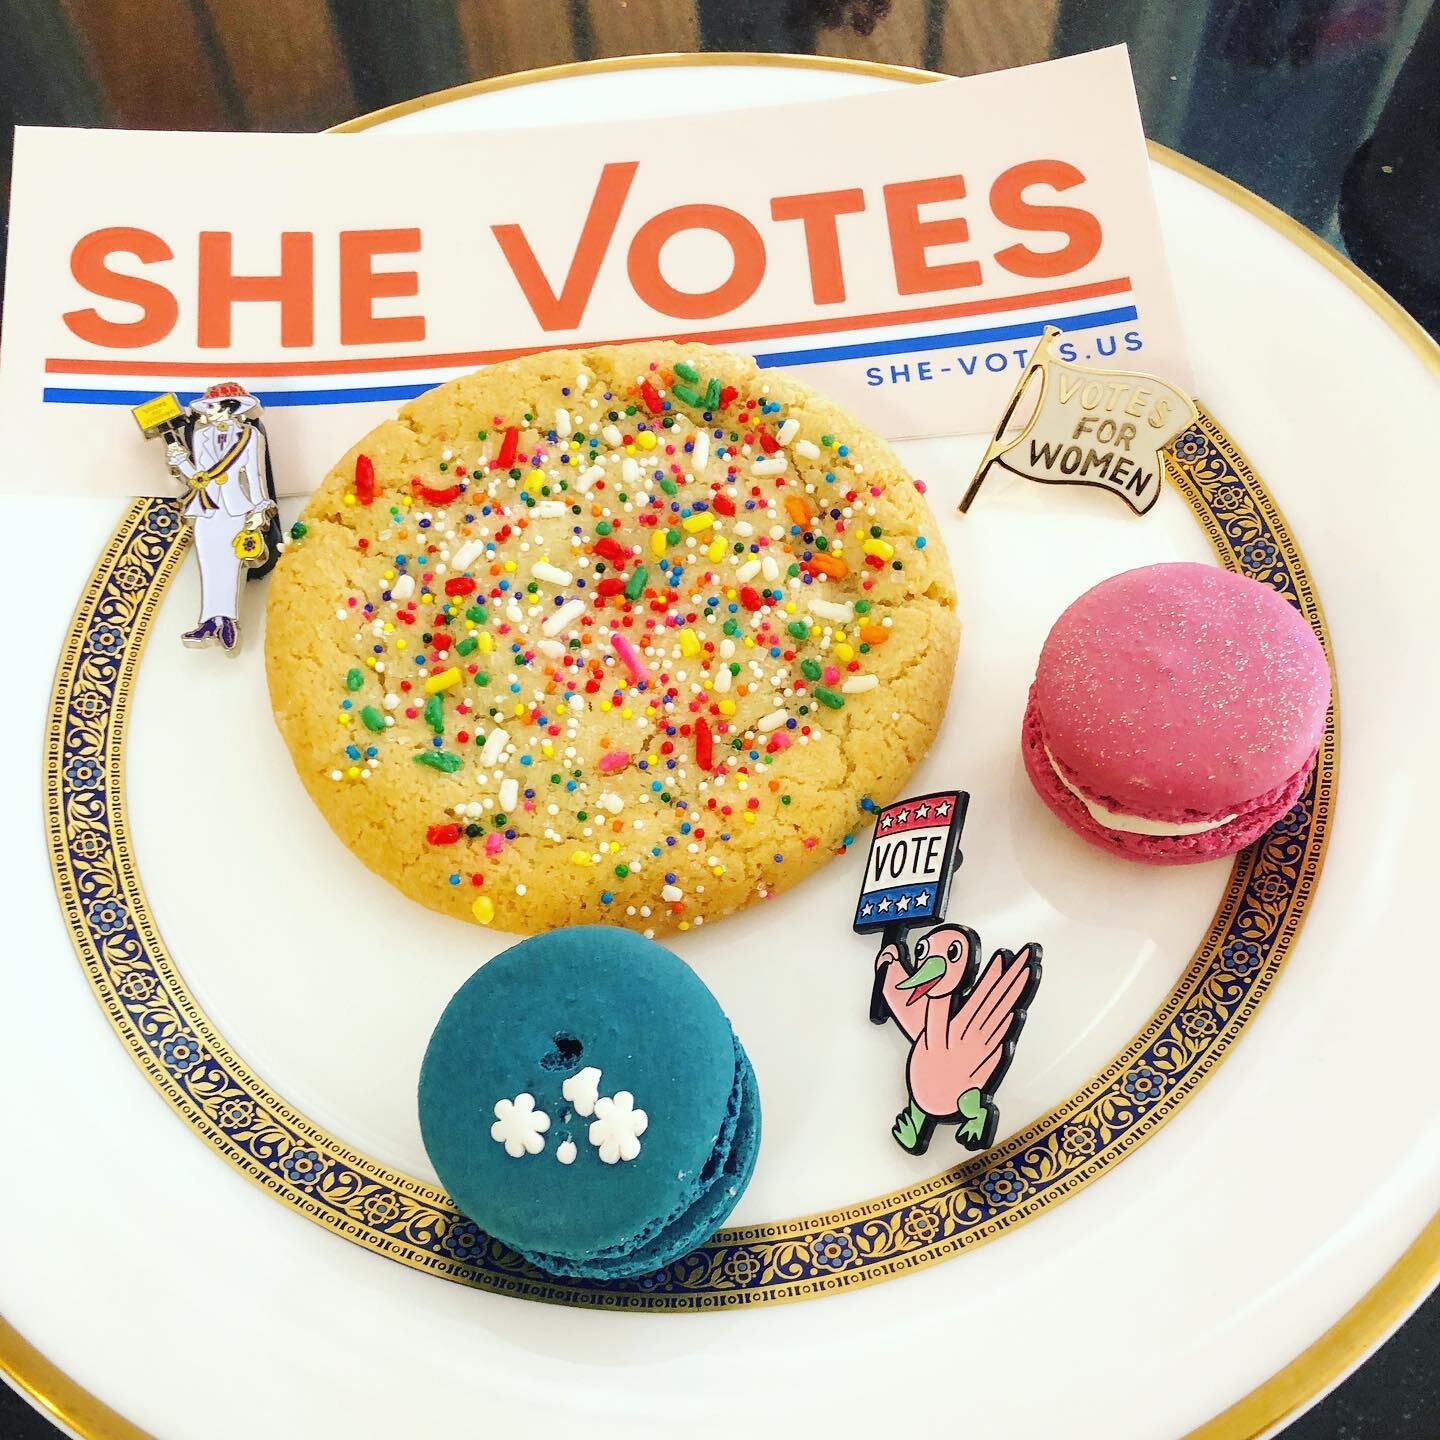 HAPPY INAUGURATION DAY!!! We went by @colleens_stl in hopes of some Inauguration 2021 themed decorated sugar cookies since @chouquettestl ran out of their incredible inauguration kit. They hadn&rsquo;t made inauguration ones but we were able to cobbl